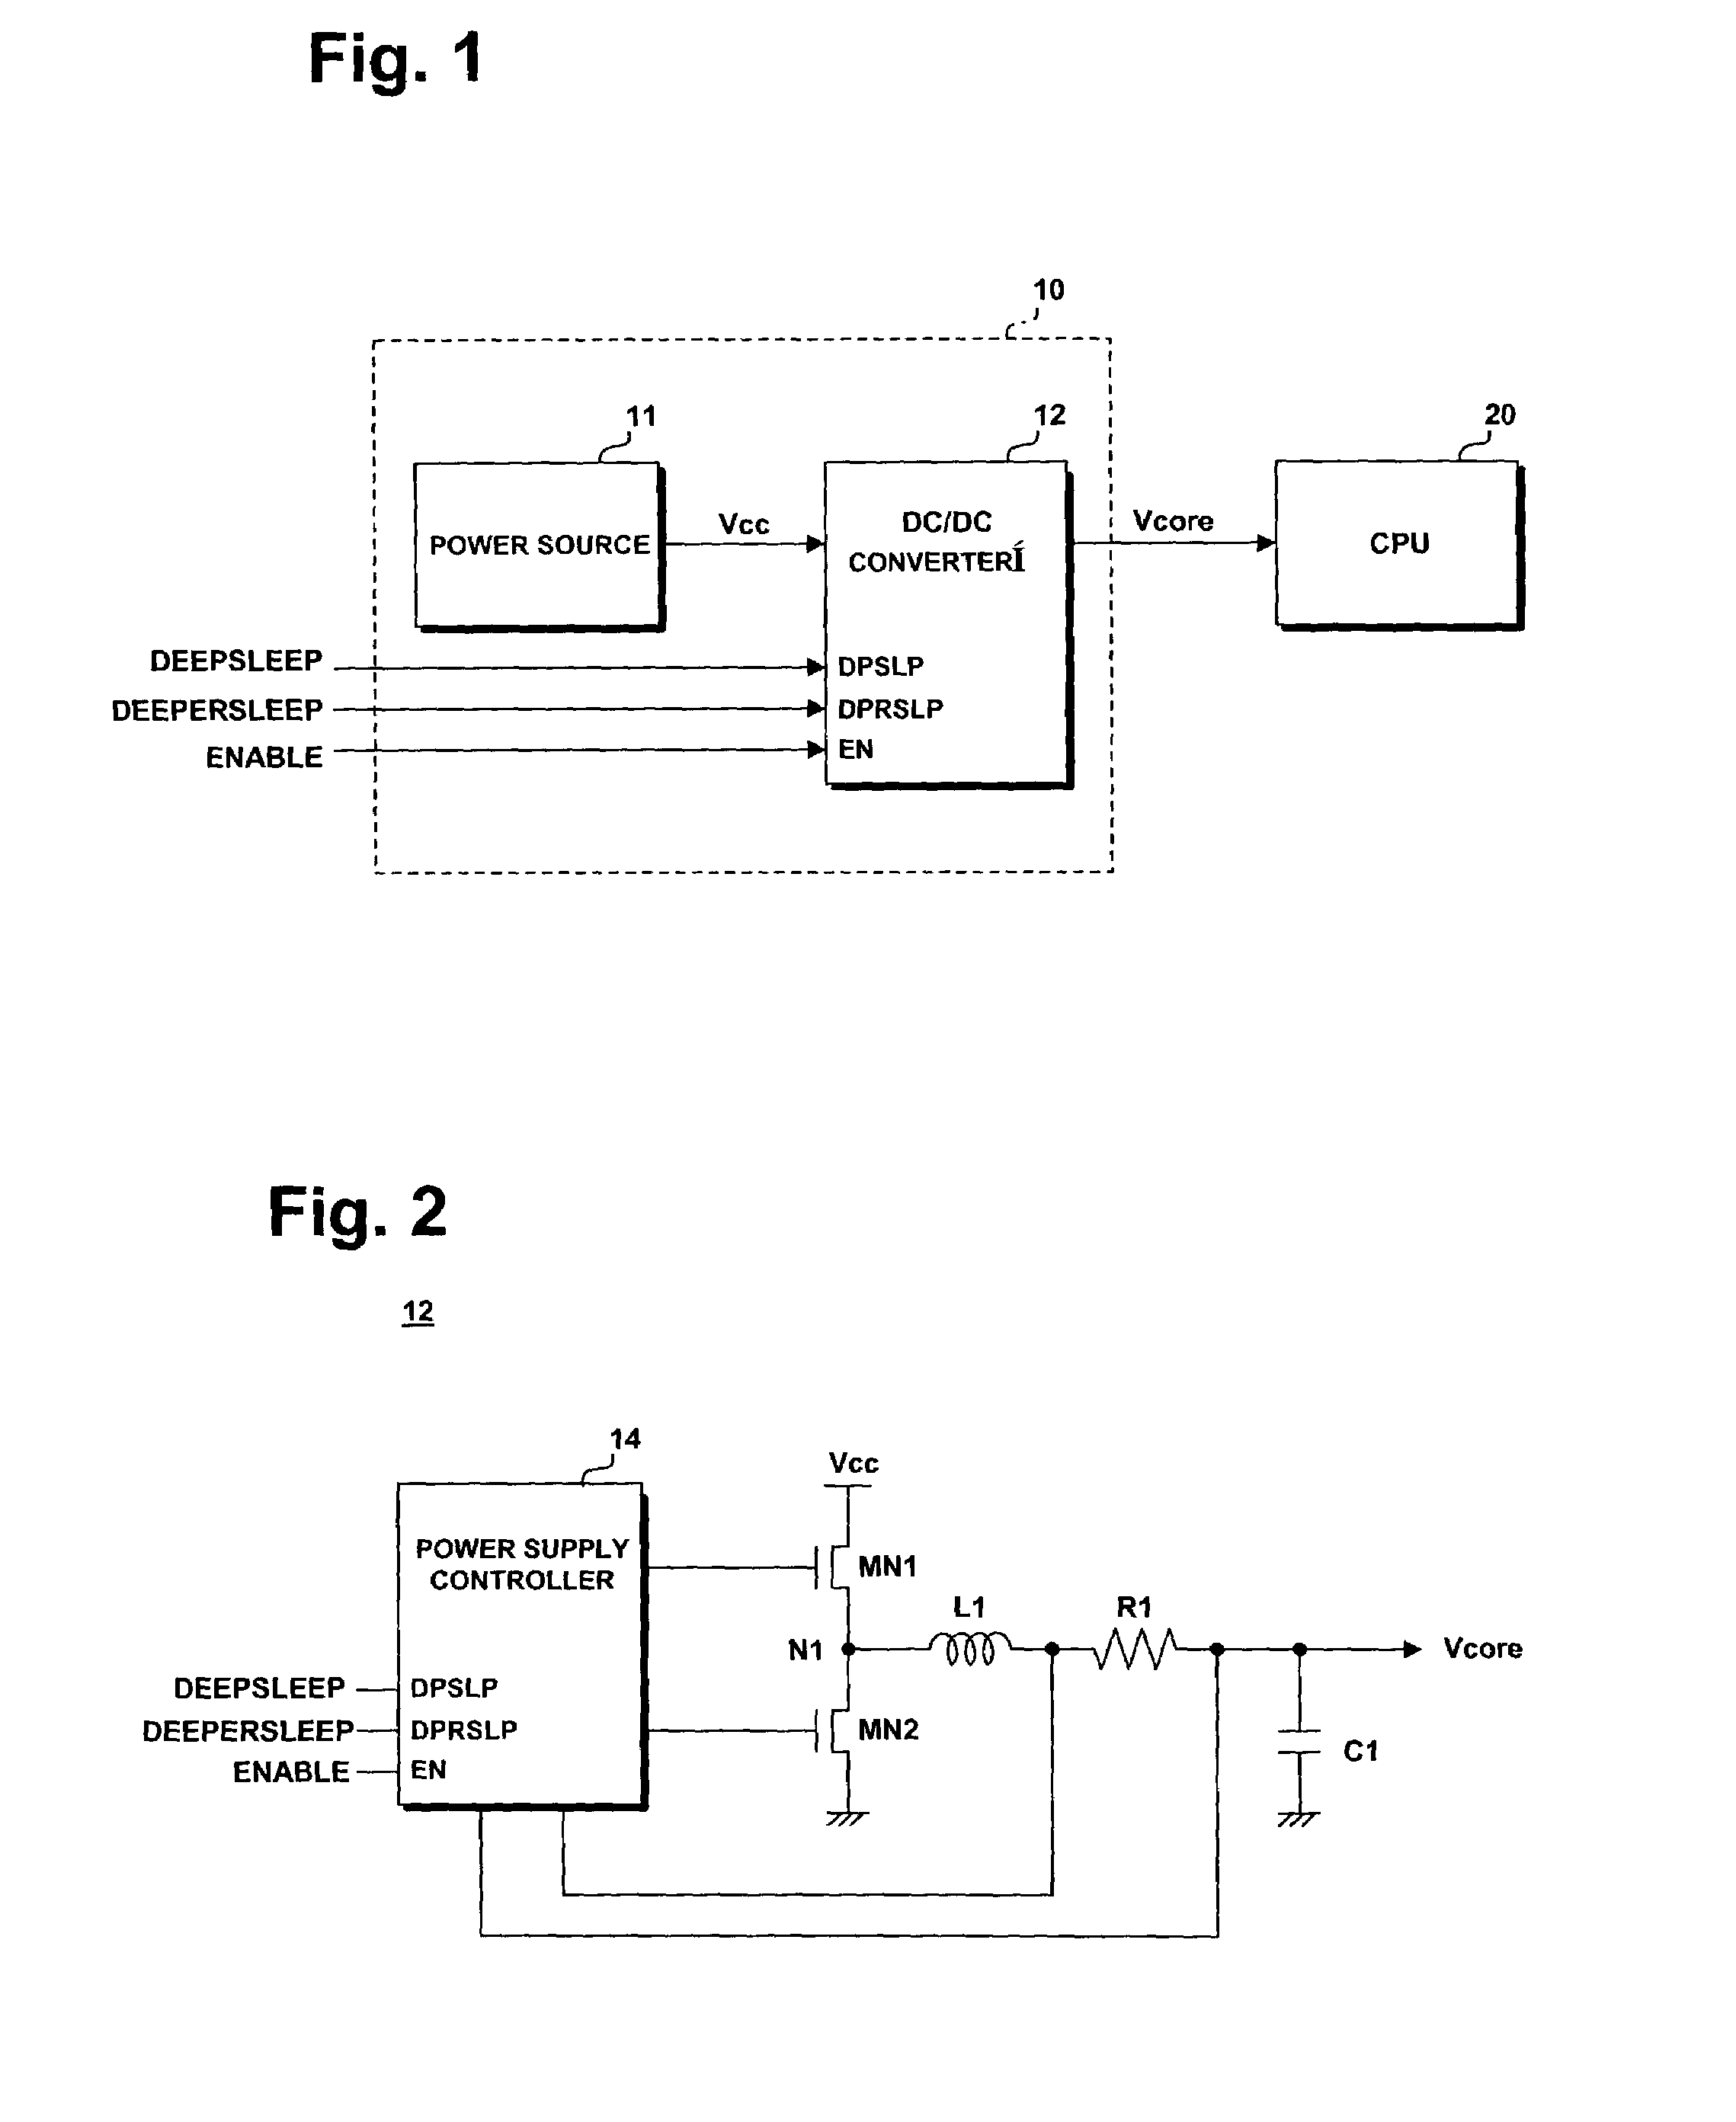 Power supply for central processing unit